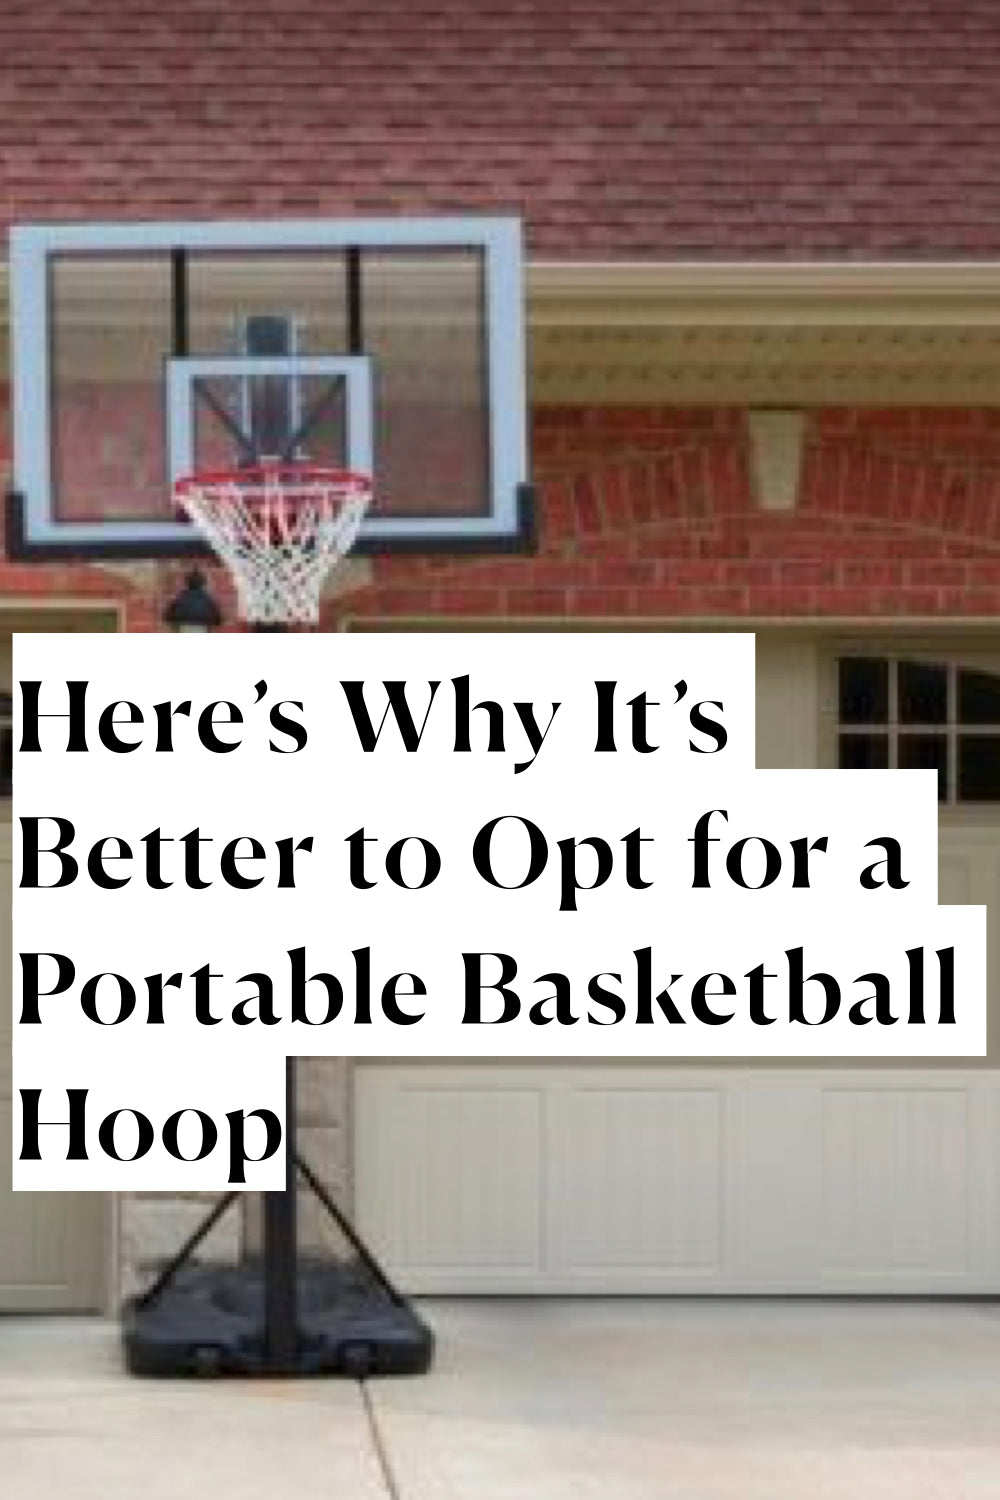 Here’s Why It’s Better to Opt for a Portable Basketball Hoop